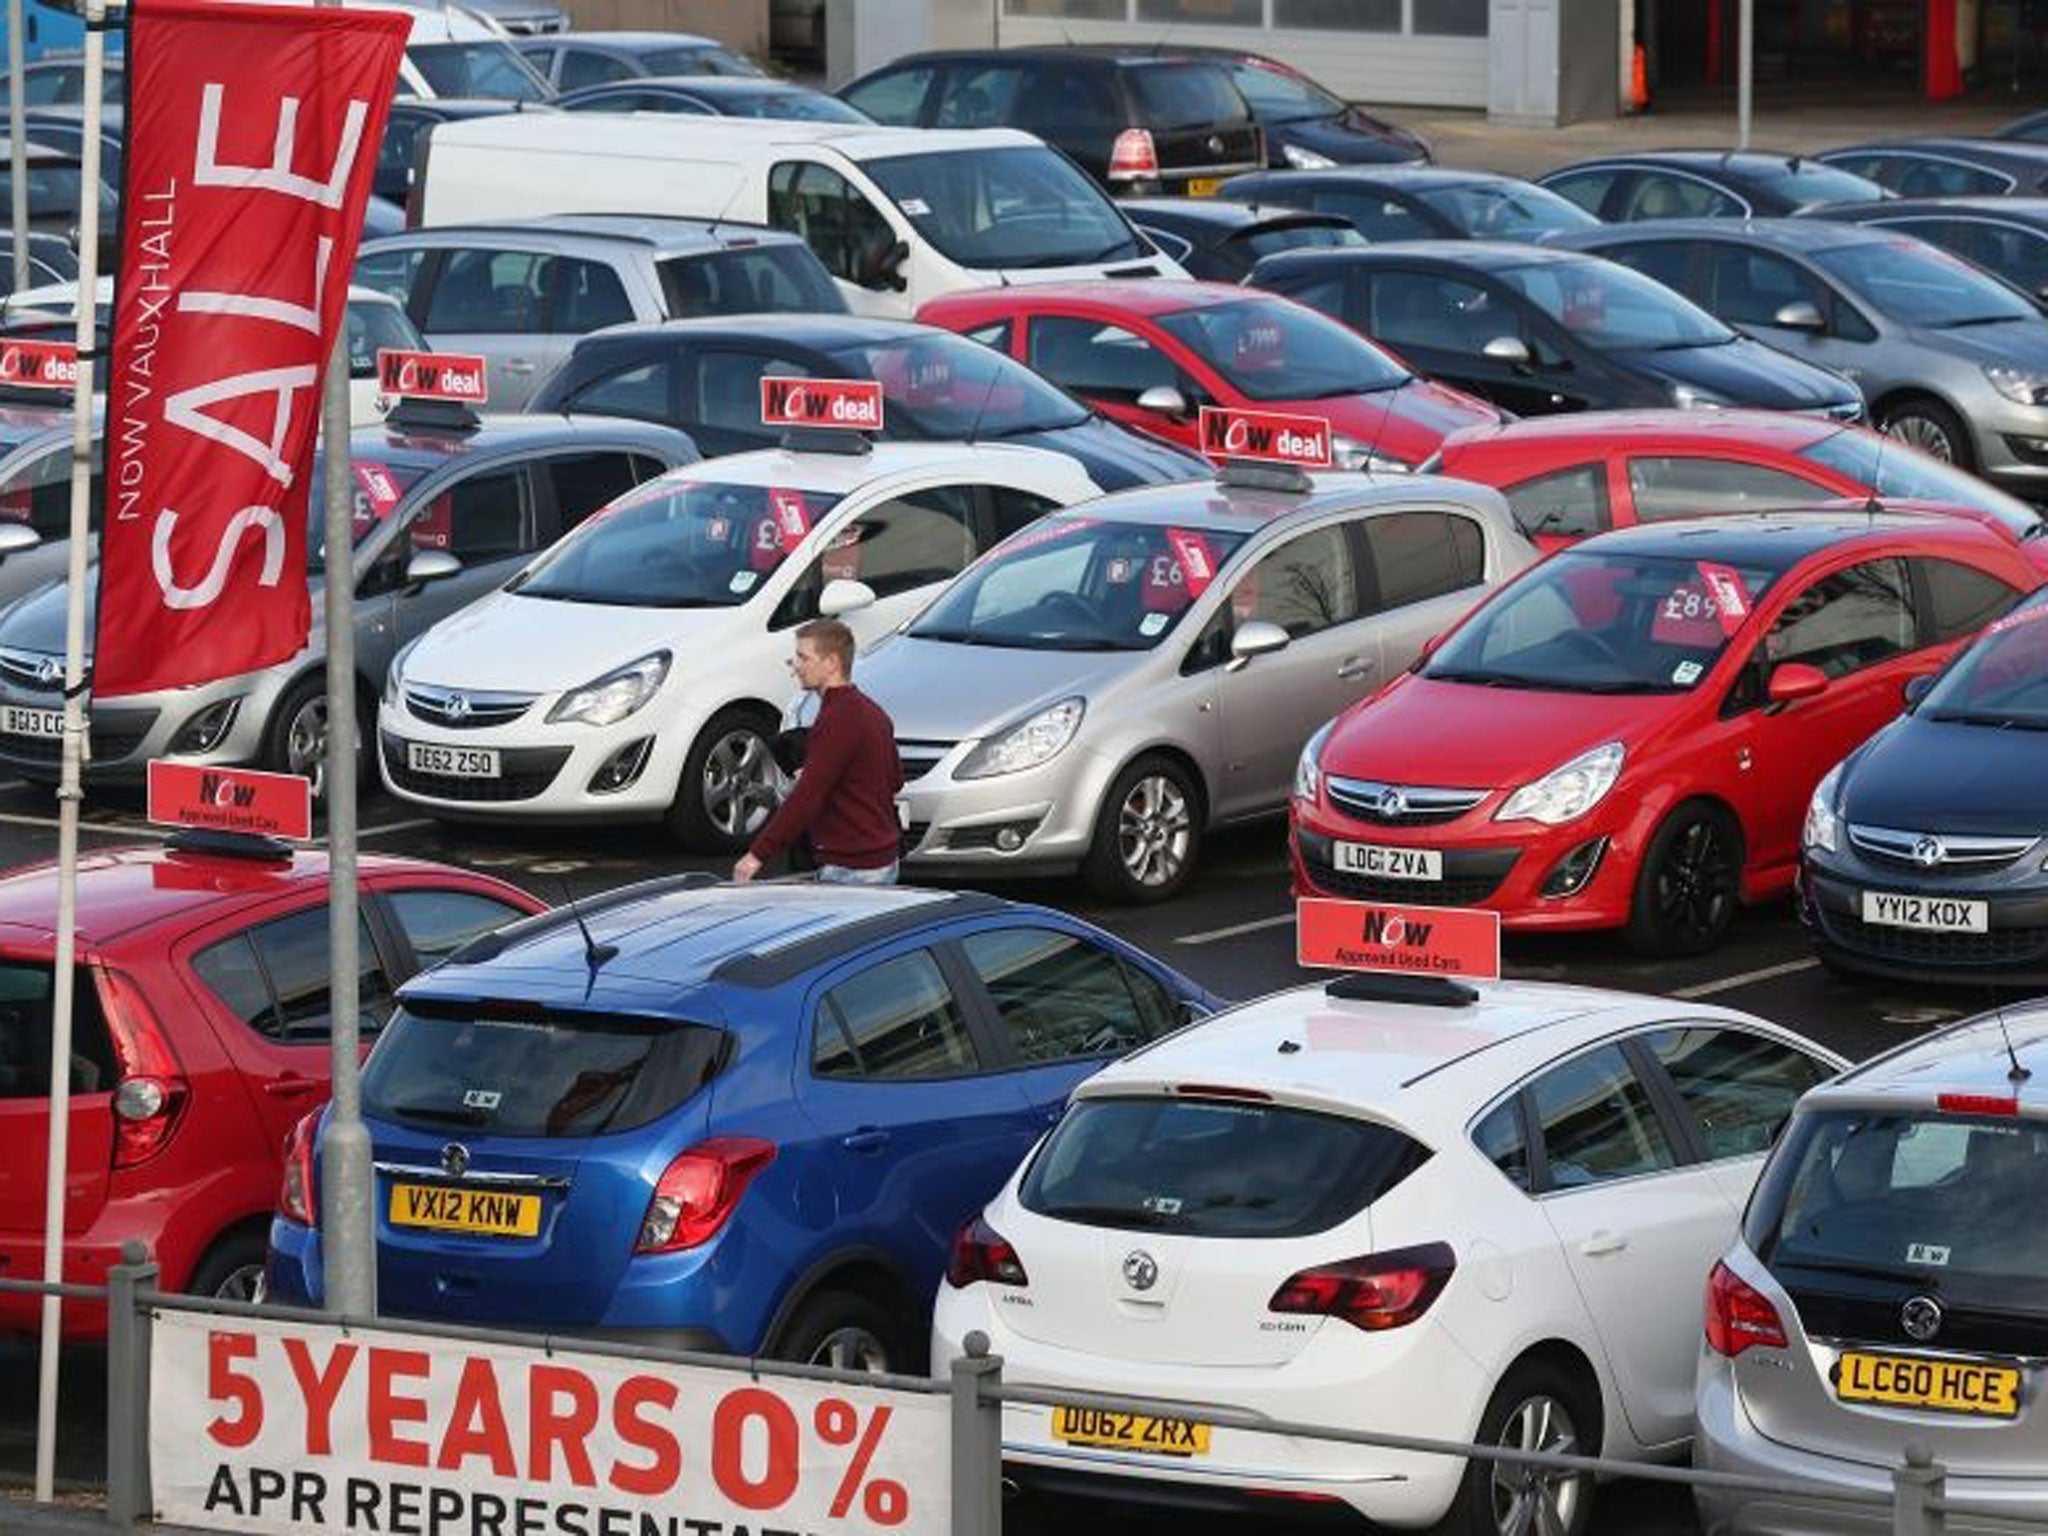 Long road ahead: A surge in car sales appears to have been driven, in part, by payouts on PPI claims. When these stop, will the brakes be applied?